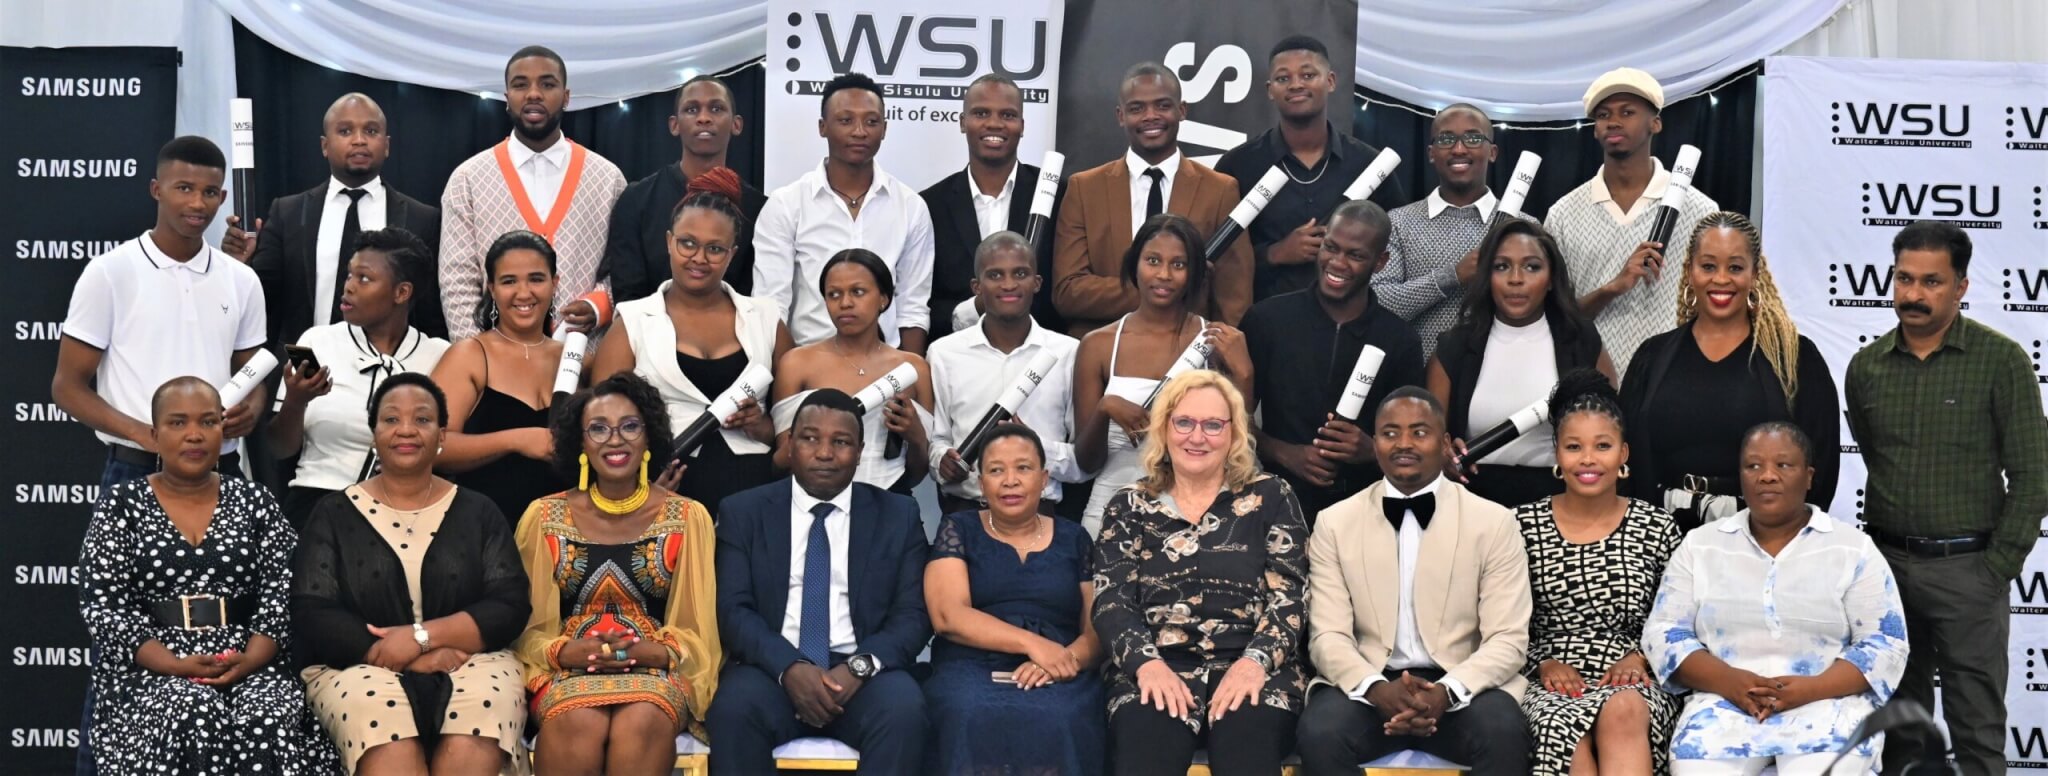 Second Cohort of Students Graduate from WSU-Samsung Innovation Campus